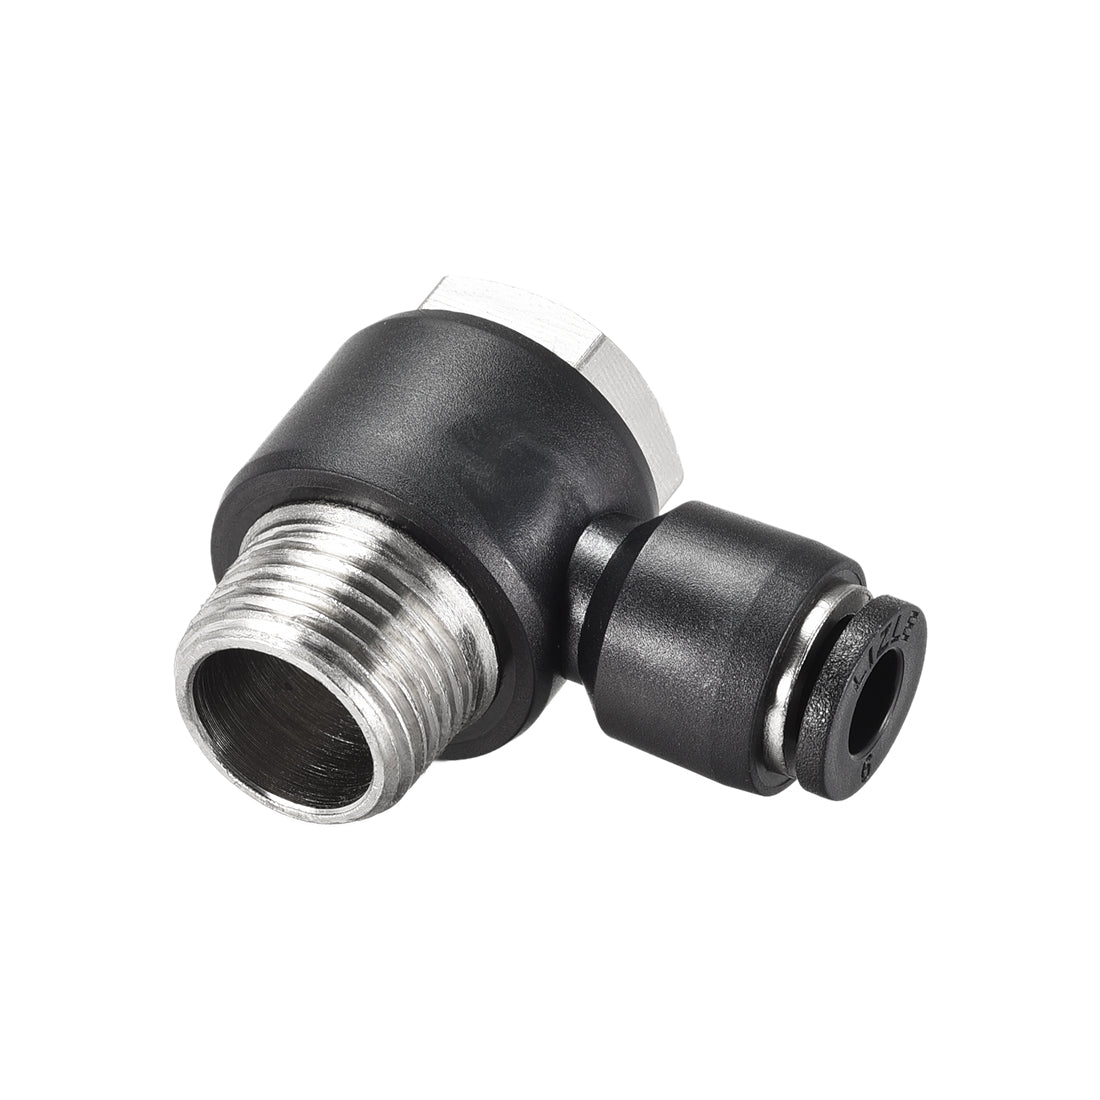 Uxcell Uxcell Pneumatic Push to Connect Tube Fitting 12mm Tube to 3/8PT Male Thread Elbow